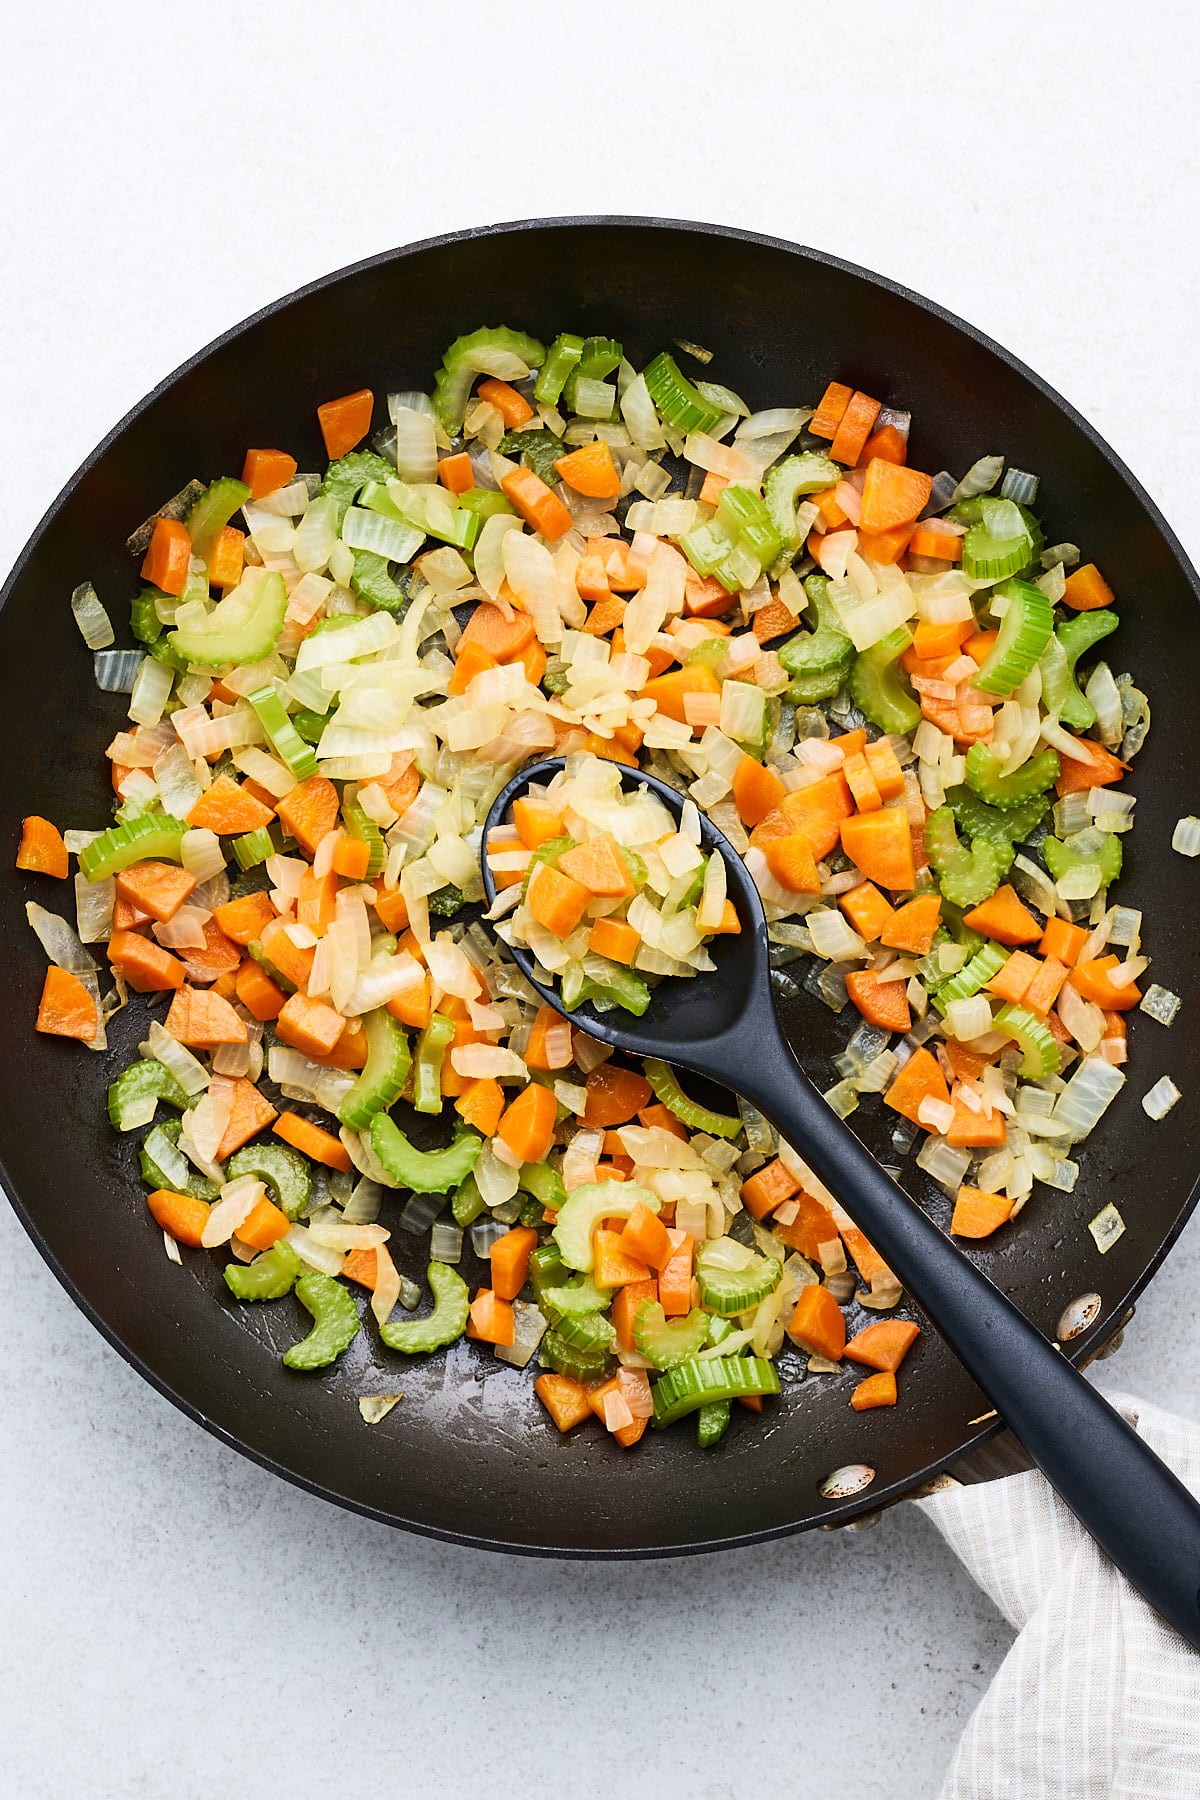 Mirepoix in a skillet.